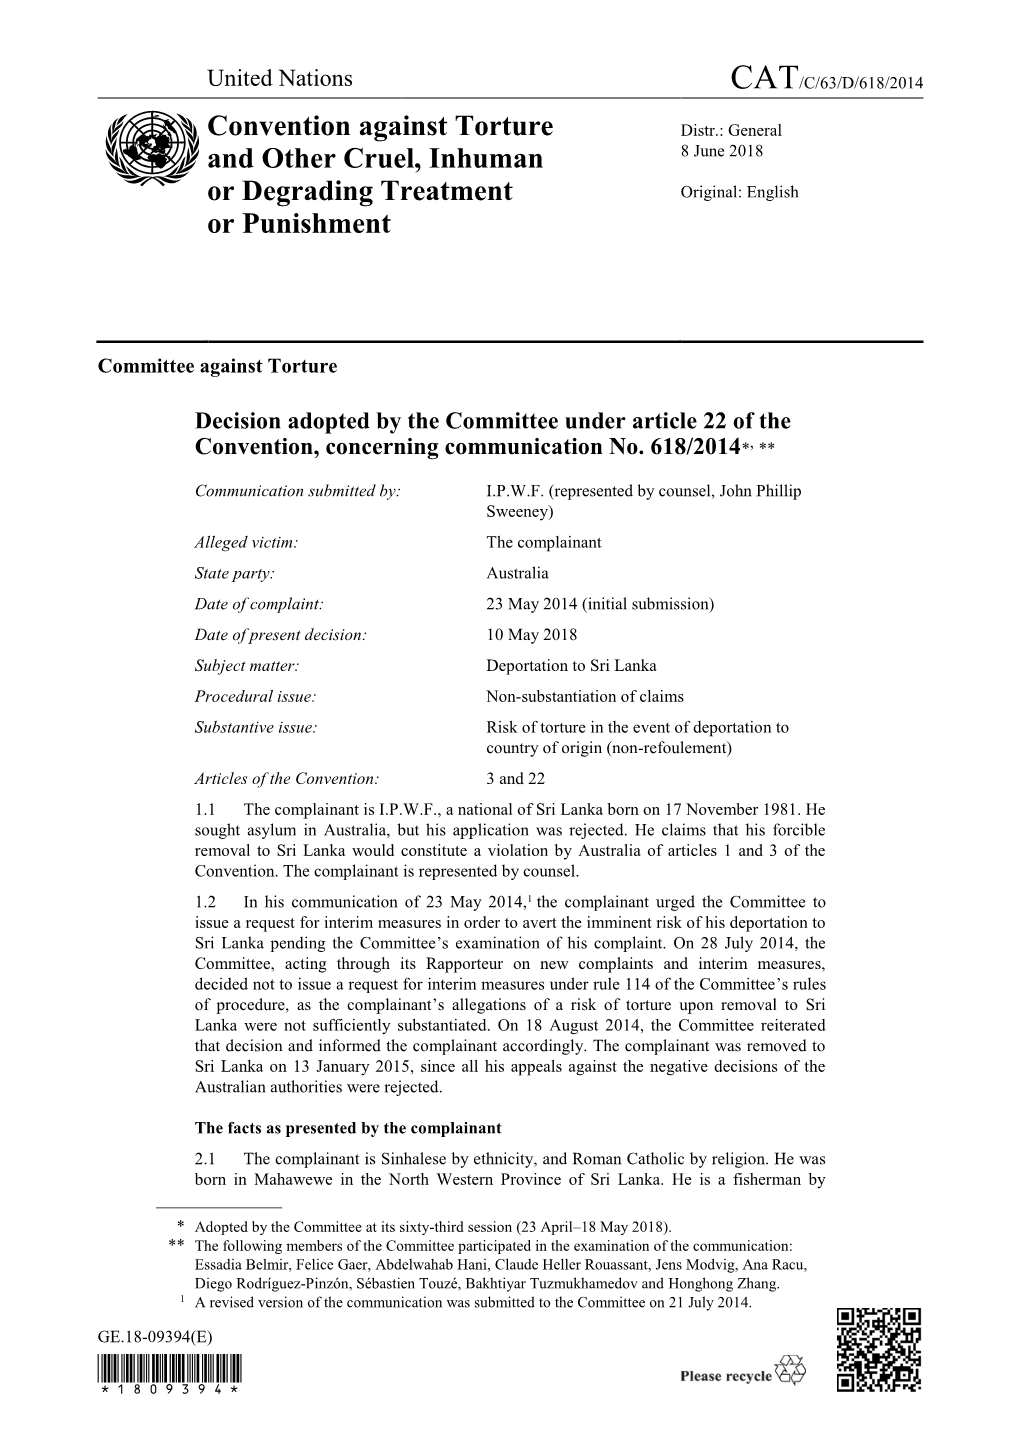 Page 1 GE.18-09394(E) Committee Against Torture Decision